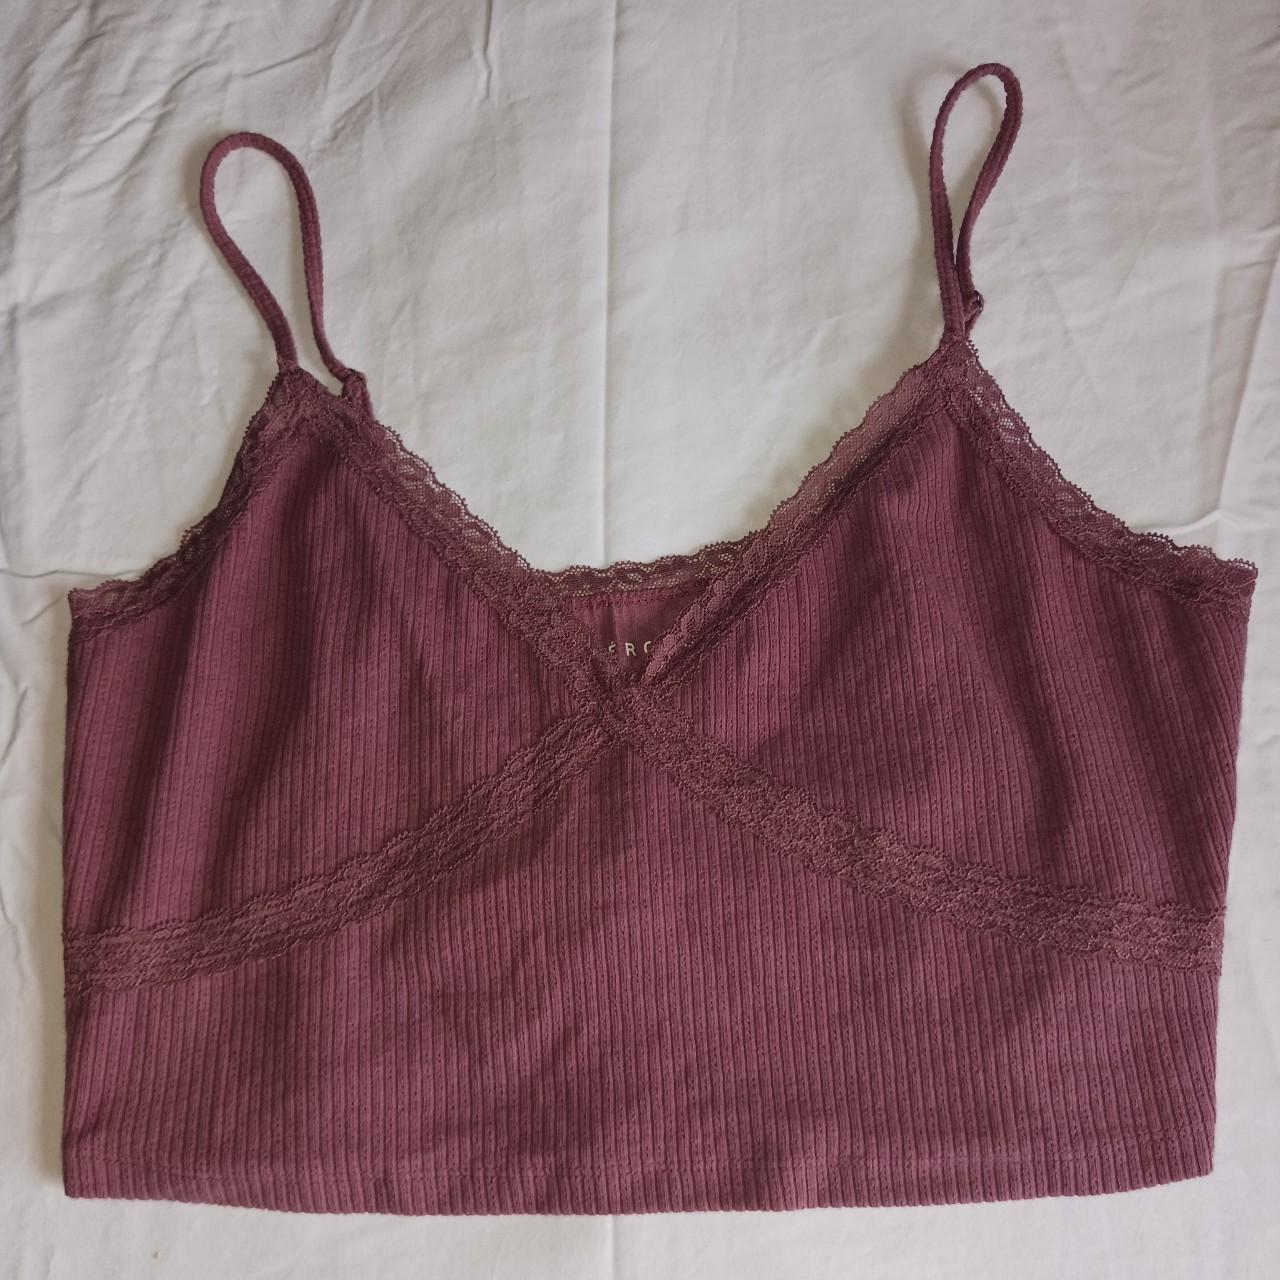 Aeropostale Laced Cami This top is a size XXL and... - Depop